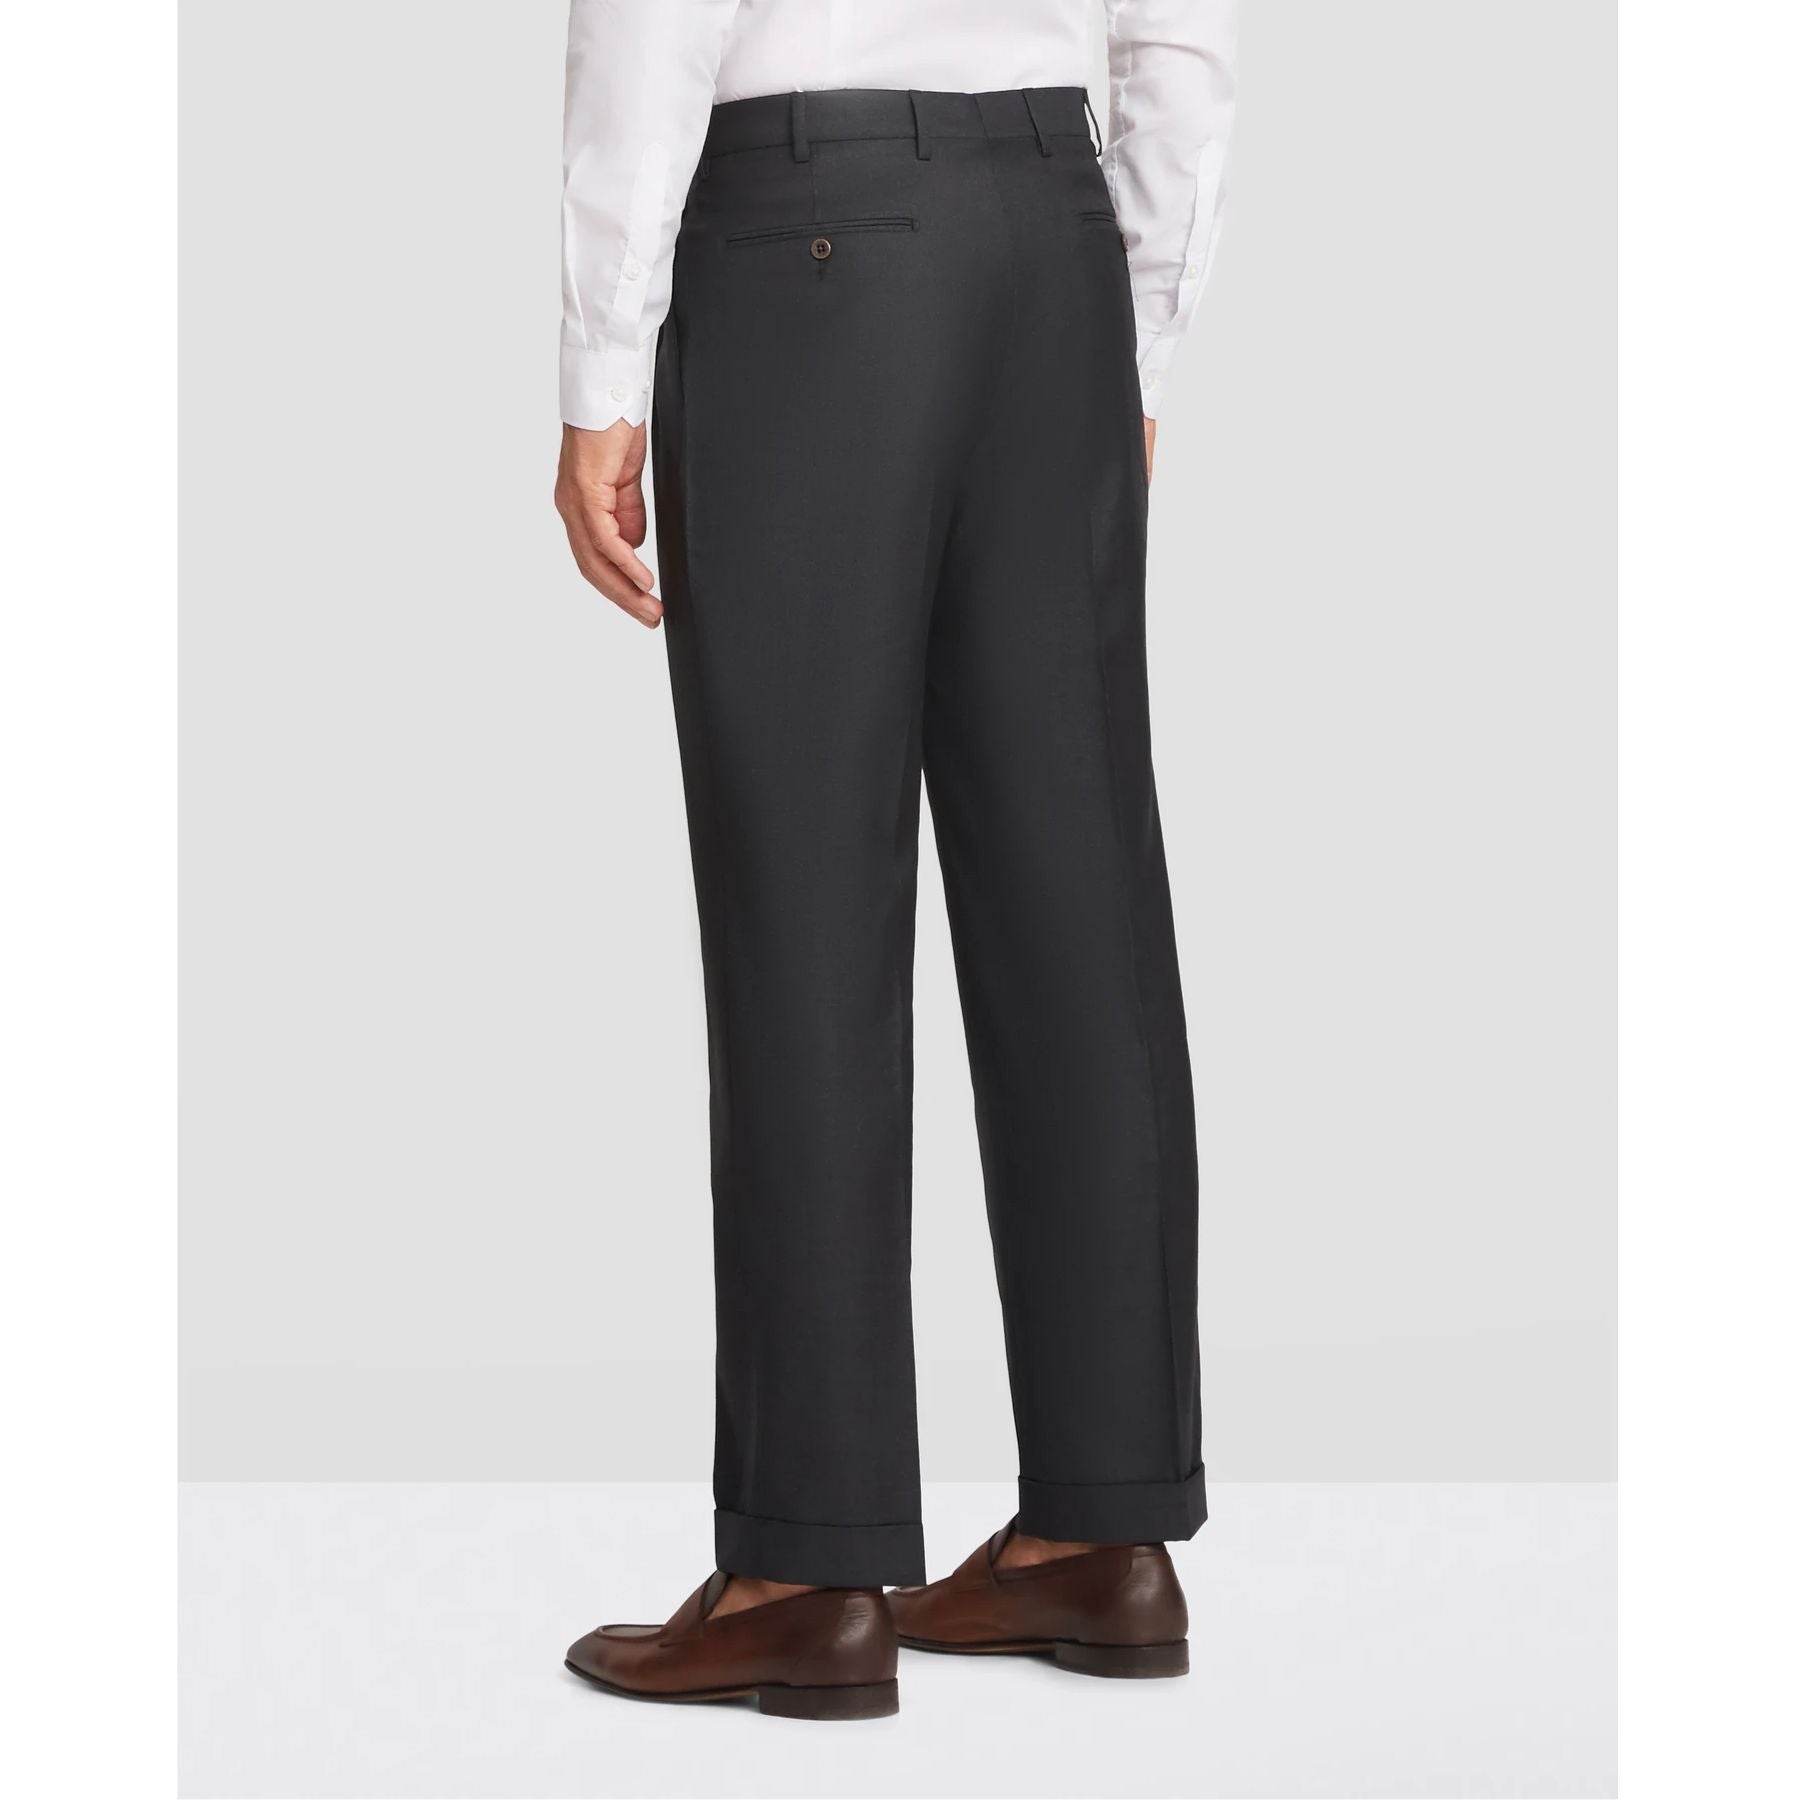 Bennett Double Pleated Super 120s Wool Fancy Trouser in Charcoal & Grey Crosshatch (Full Fit) - LIMITED EDITION by Zanella